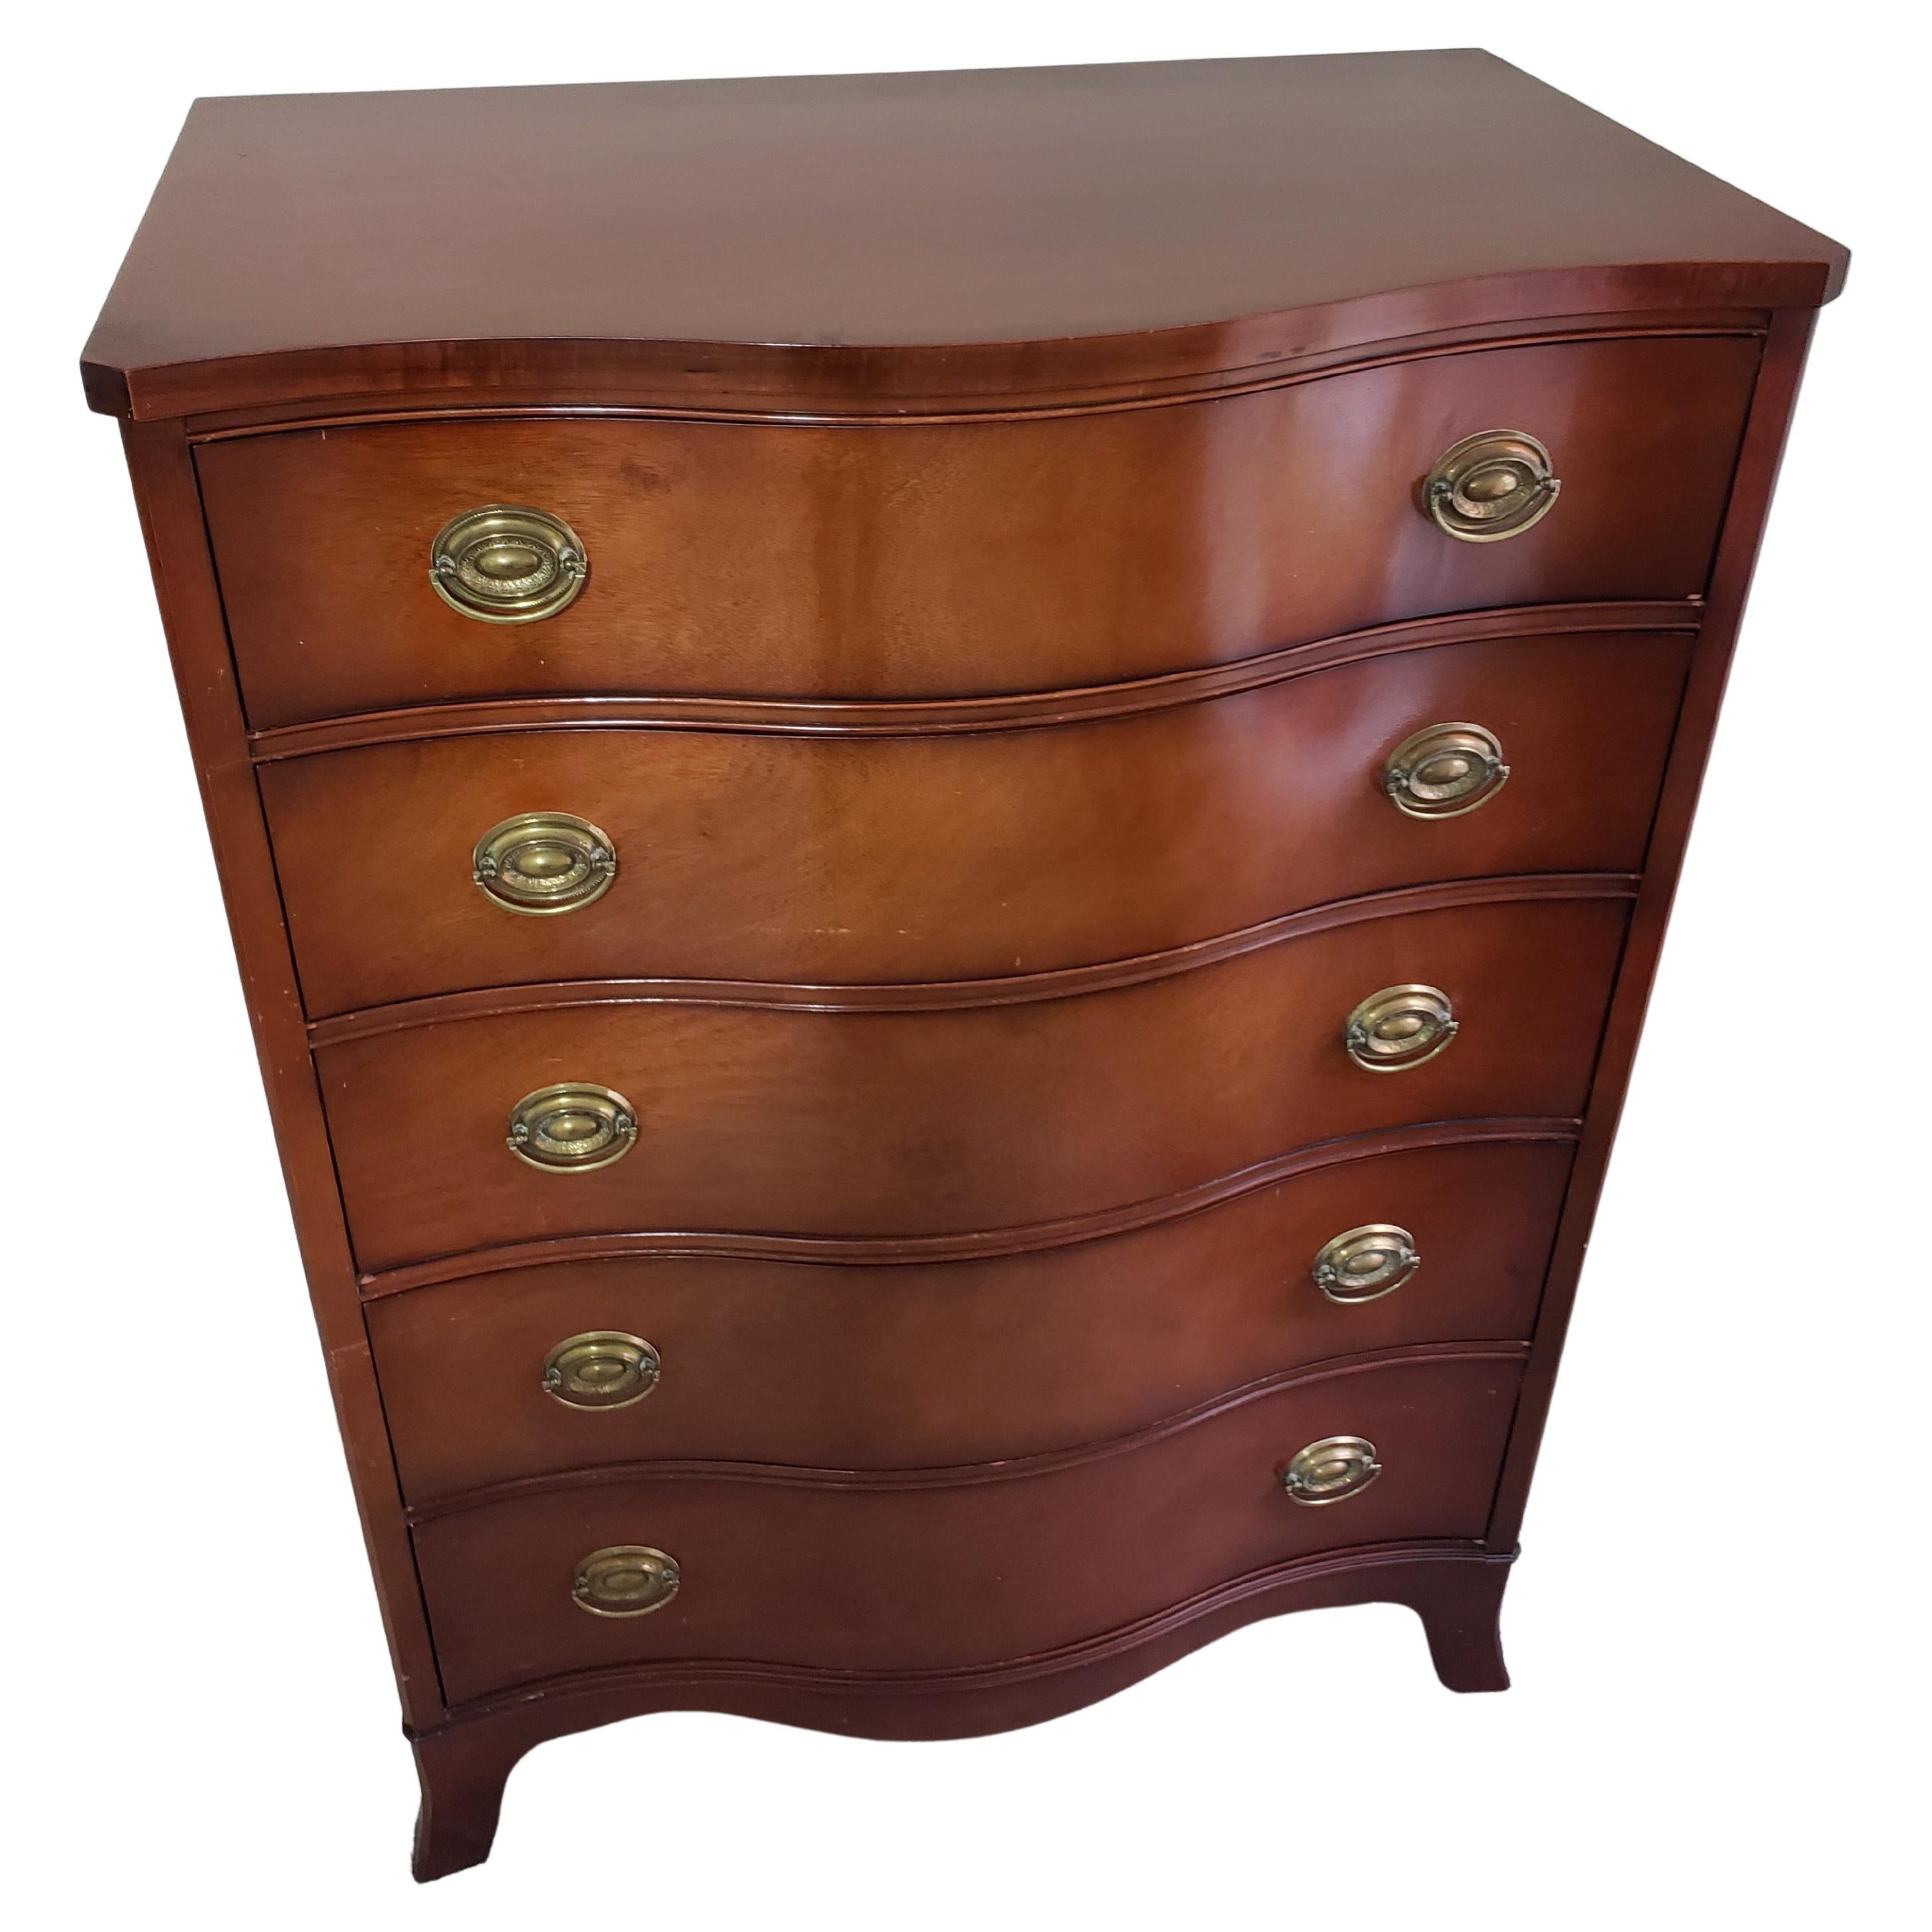 Drexel Travis Court Collection Mahogany Federal Chest of Drawers, Circa 1940s. 
5 deep dovetailed drawers, middle compartmented drawer. Very good vintage condition. All drawers perfectly functional. 
 Measures 36 inches in width, 21 inches in